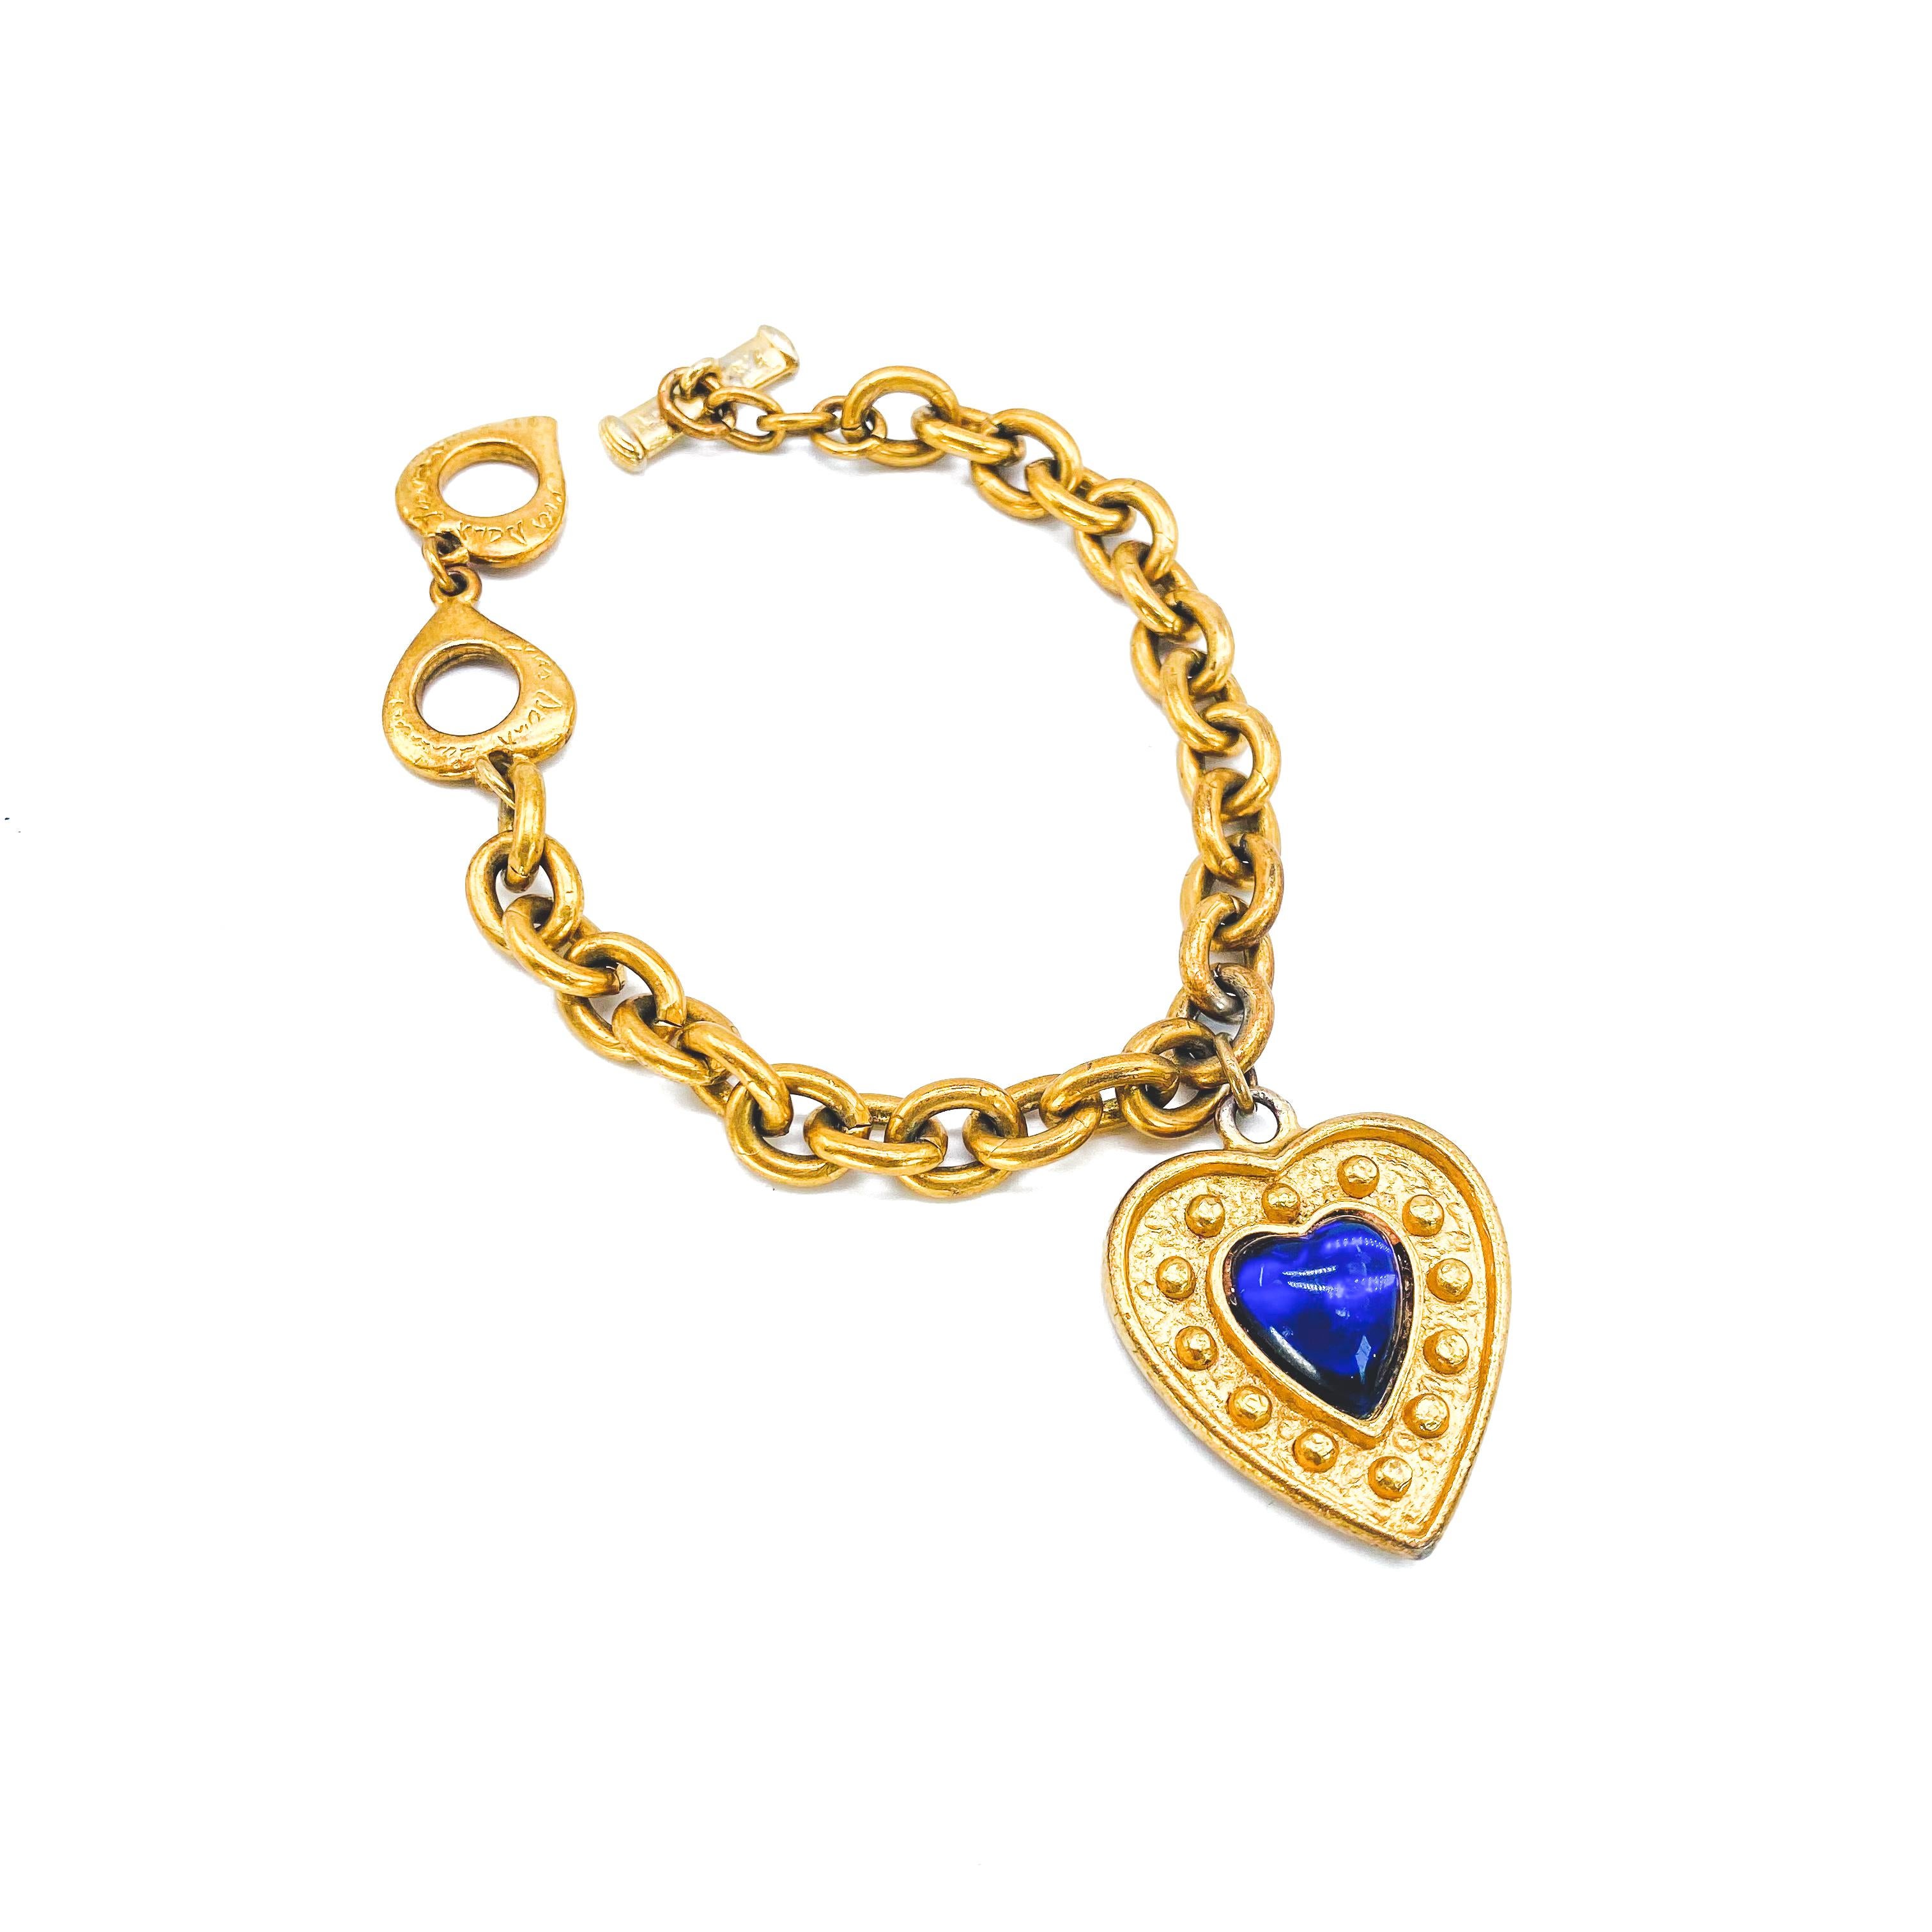 Yves Saint Laurent Vintage 1980s Bracelet

Detail
-Made in France in the late 1980s
-Expertly crafted from gold plated metal
-Chunky gold chain
-Large YSL heart shaped charm set with a lapis lazuli coloured stone

Size & Fit
-Length approx 7 inches